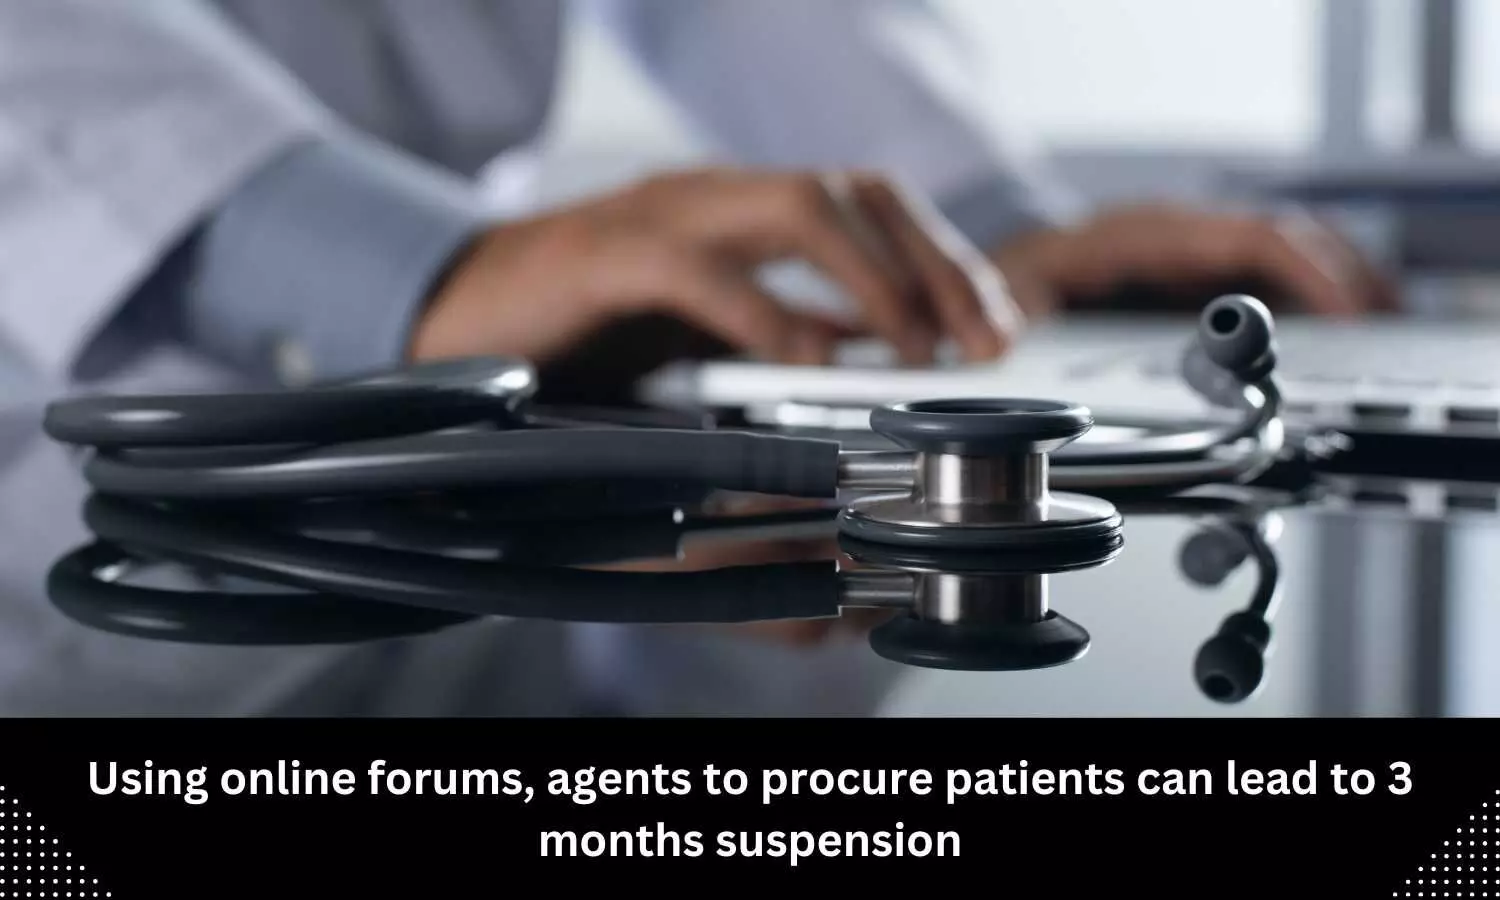 Using online forums, agents to procure patients can lead to 3 months suspension